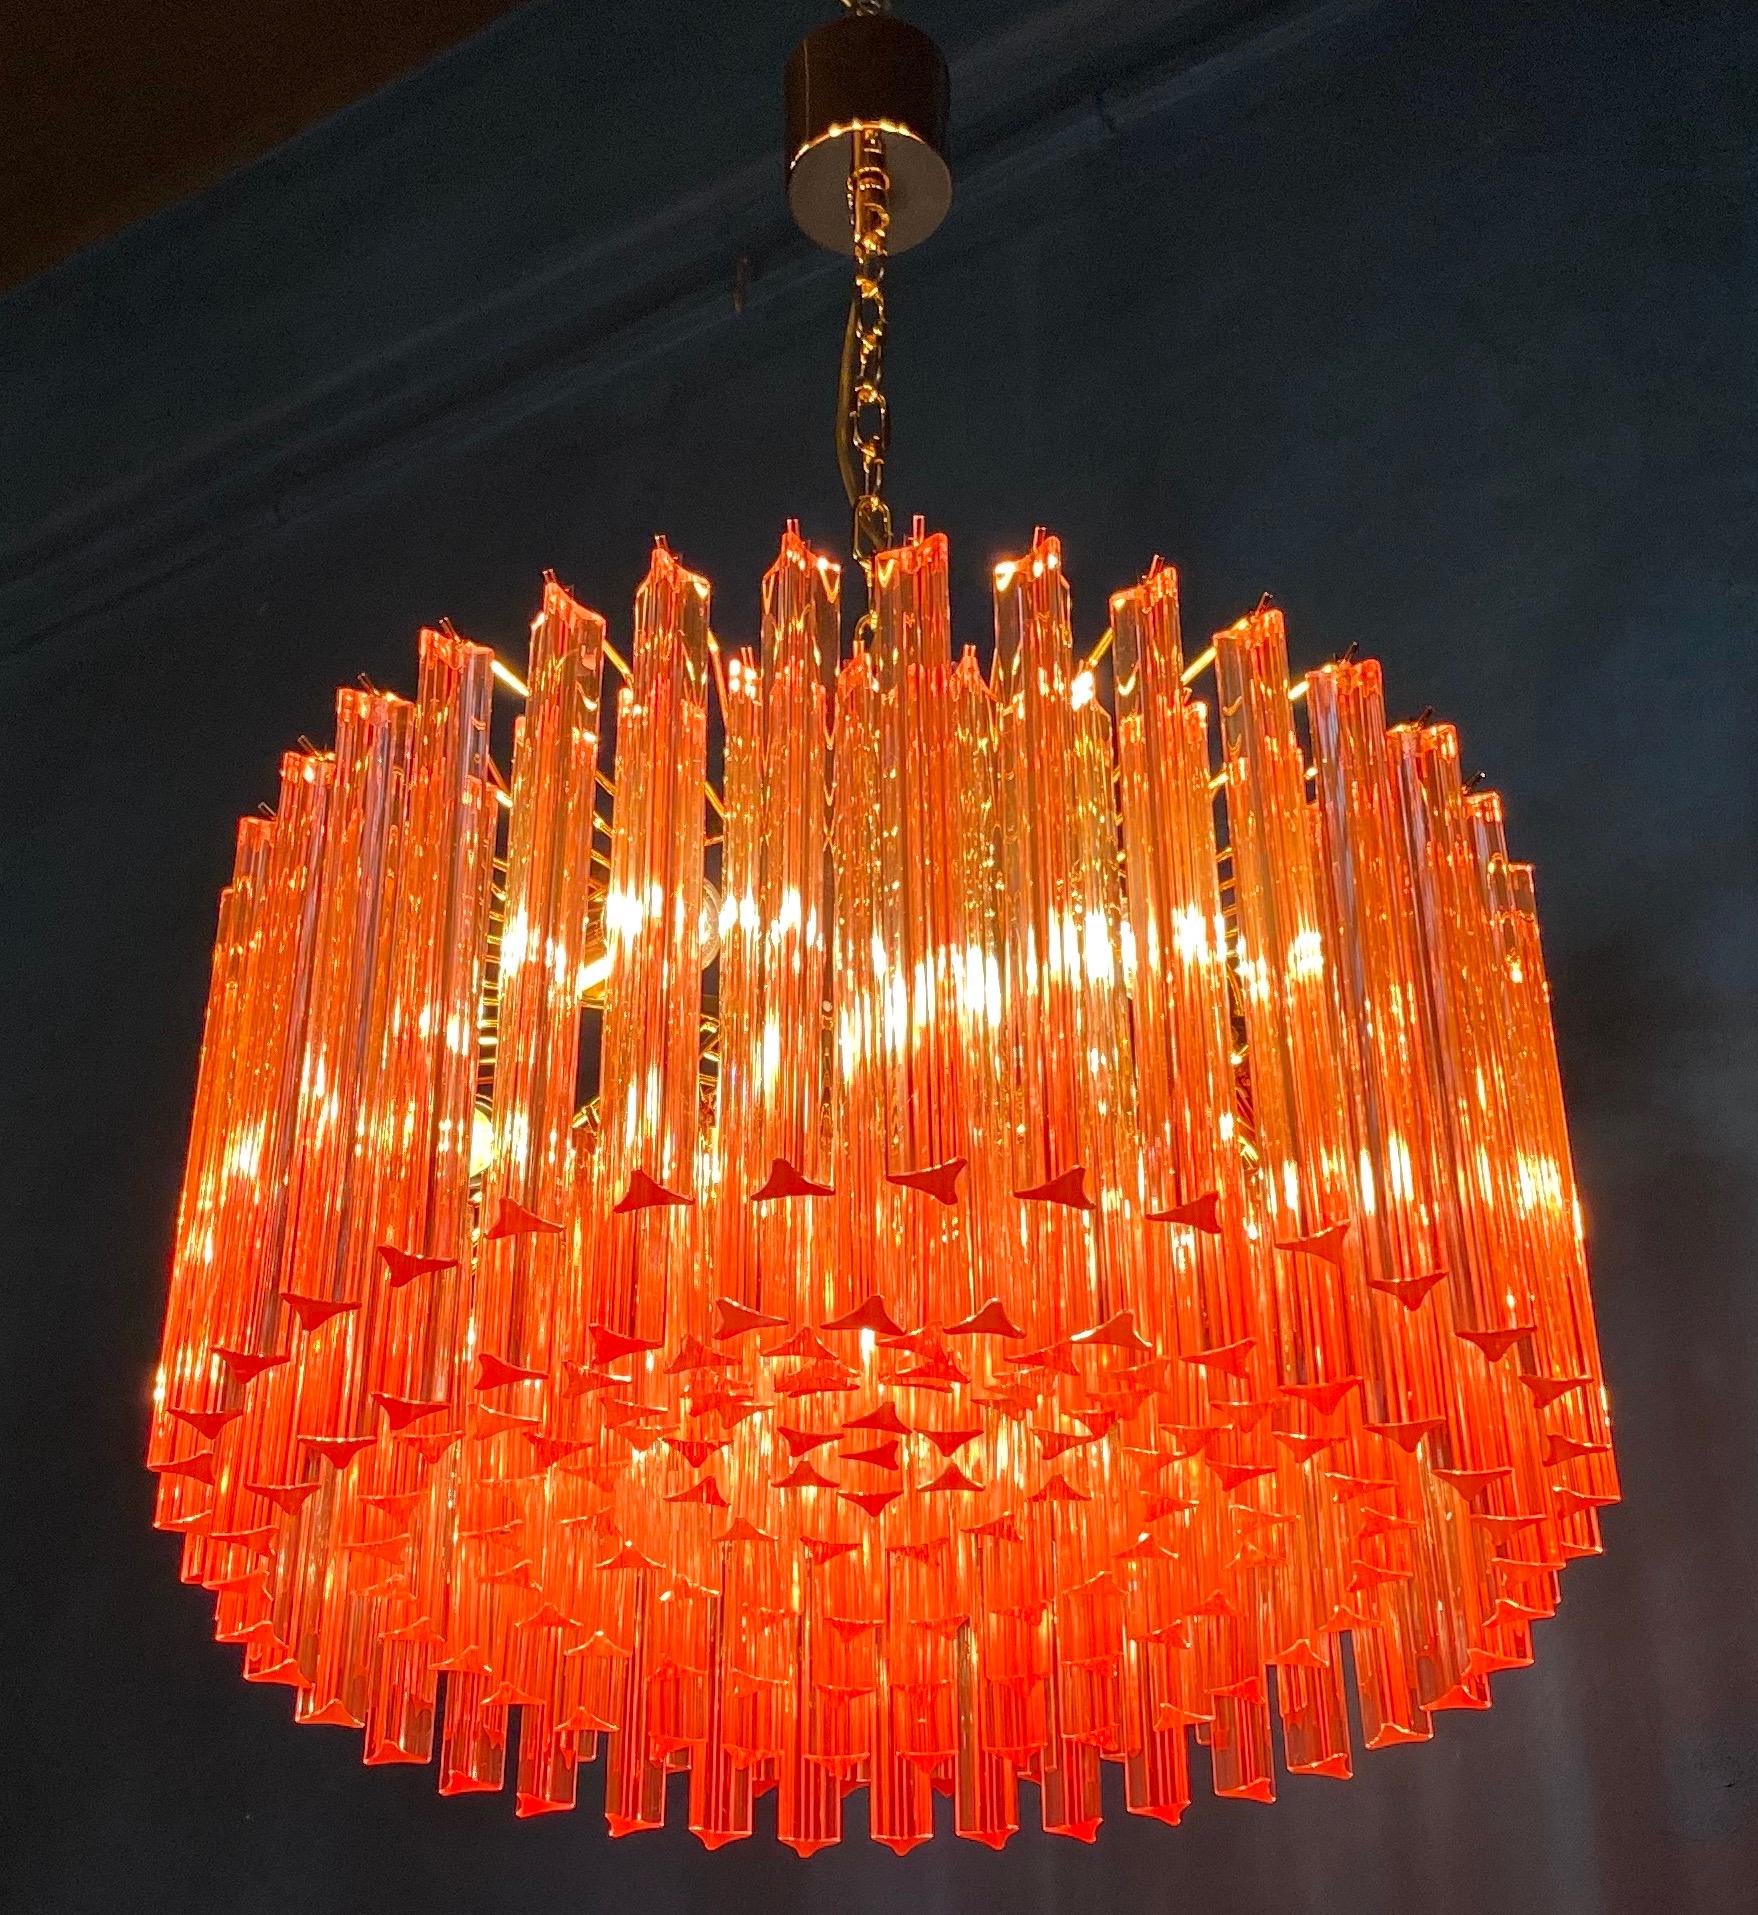 Fabulous Murano glass chandelier with stunning  coral color triedri on brass frame.
Available a pair.
Dimensions: 43.30 inches (110 cm) height with chain; 13 inches (33 cm) height without chain; 23.5 inches (60 cm) diameter.
Light bulbs: 6 light